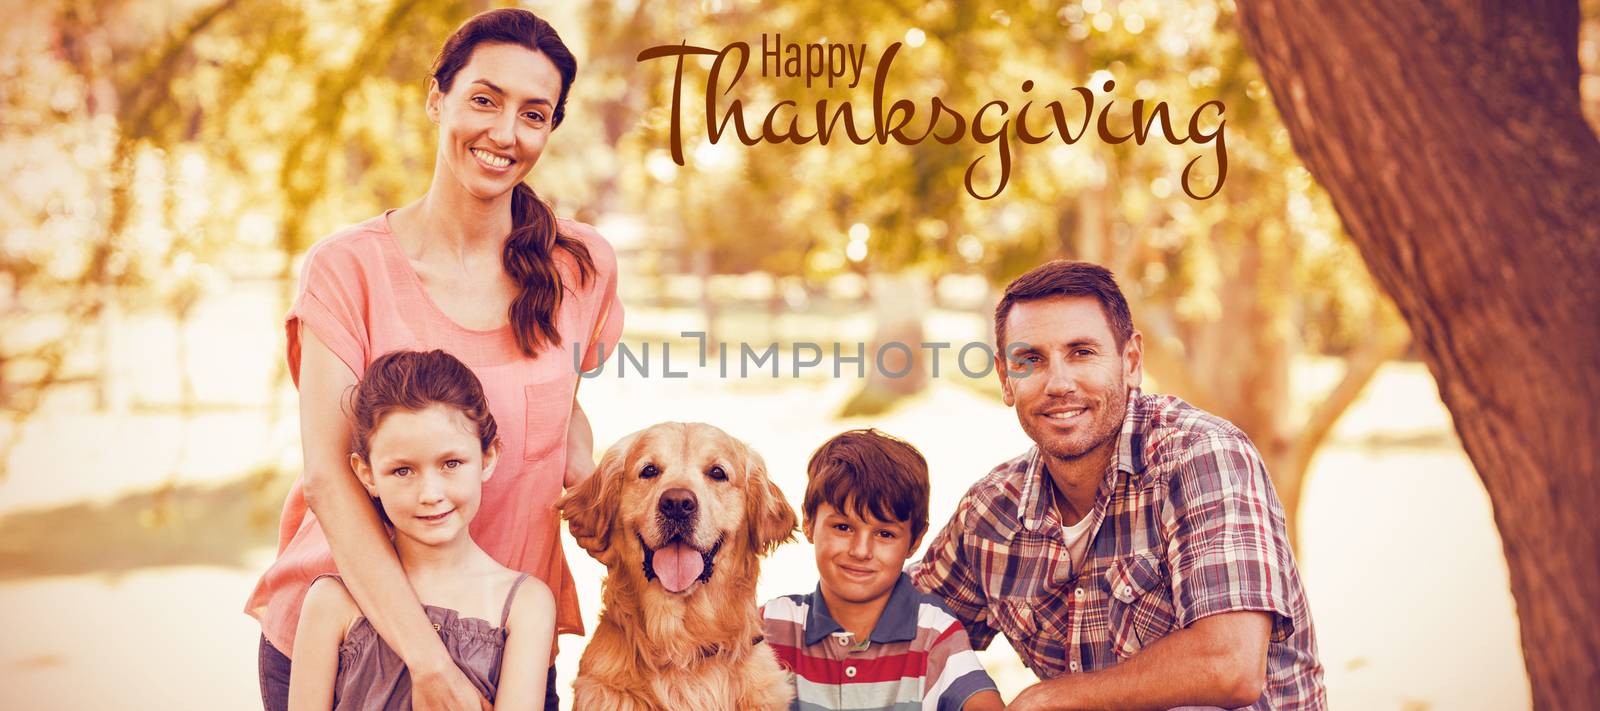 Illustration of happy thanksgiving day text greeting against portrait of happy family with dog in park